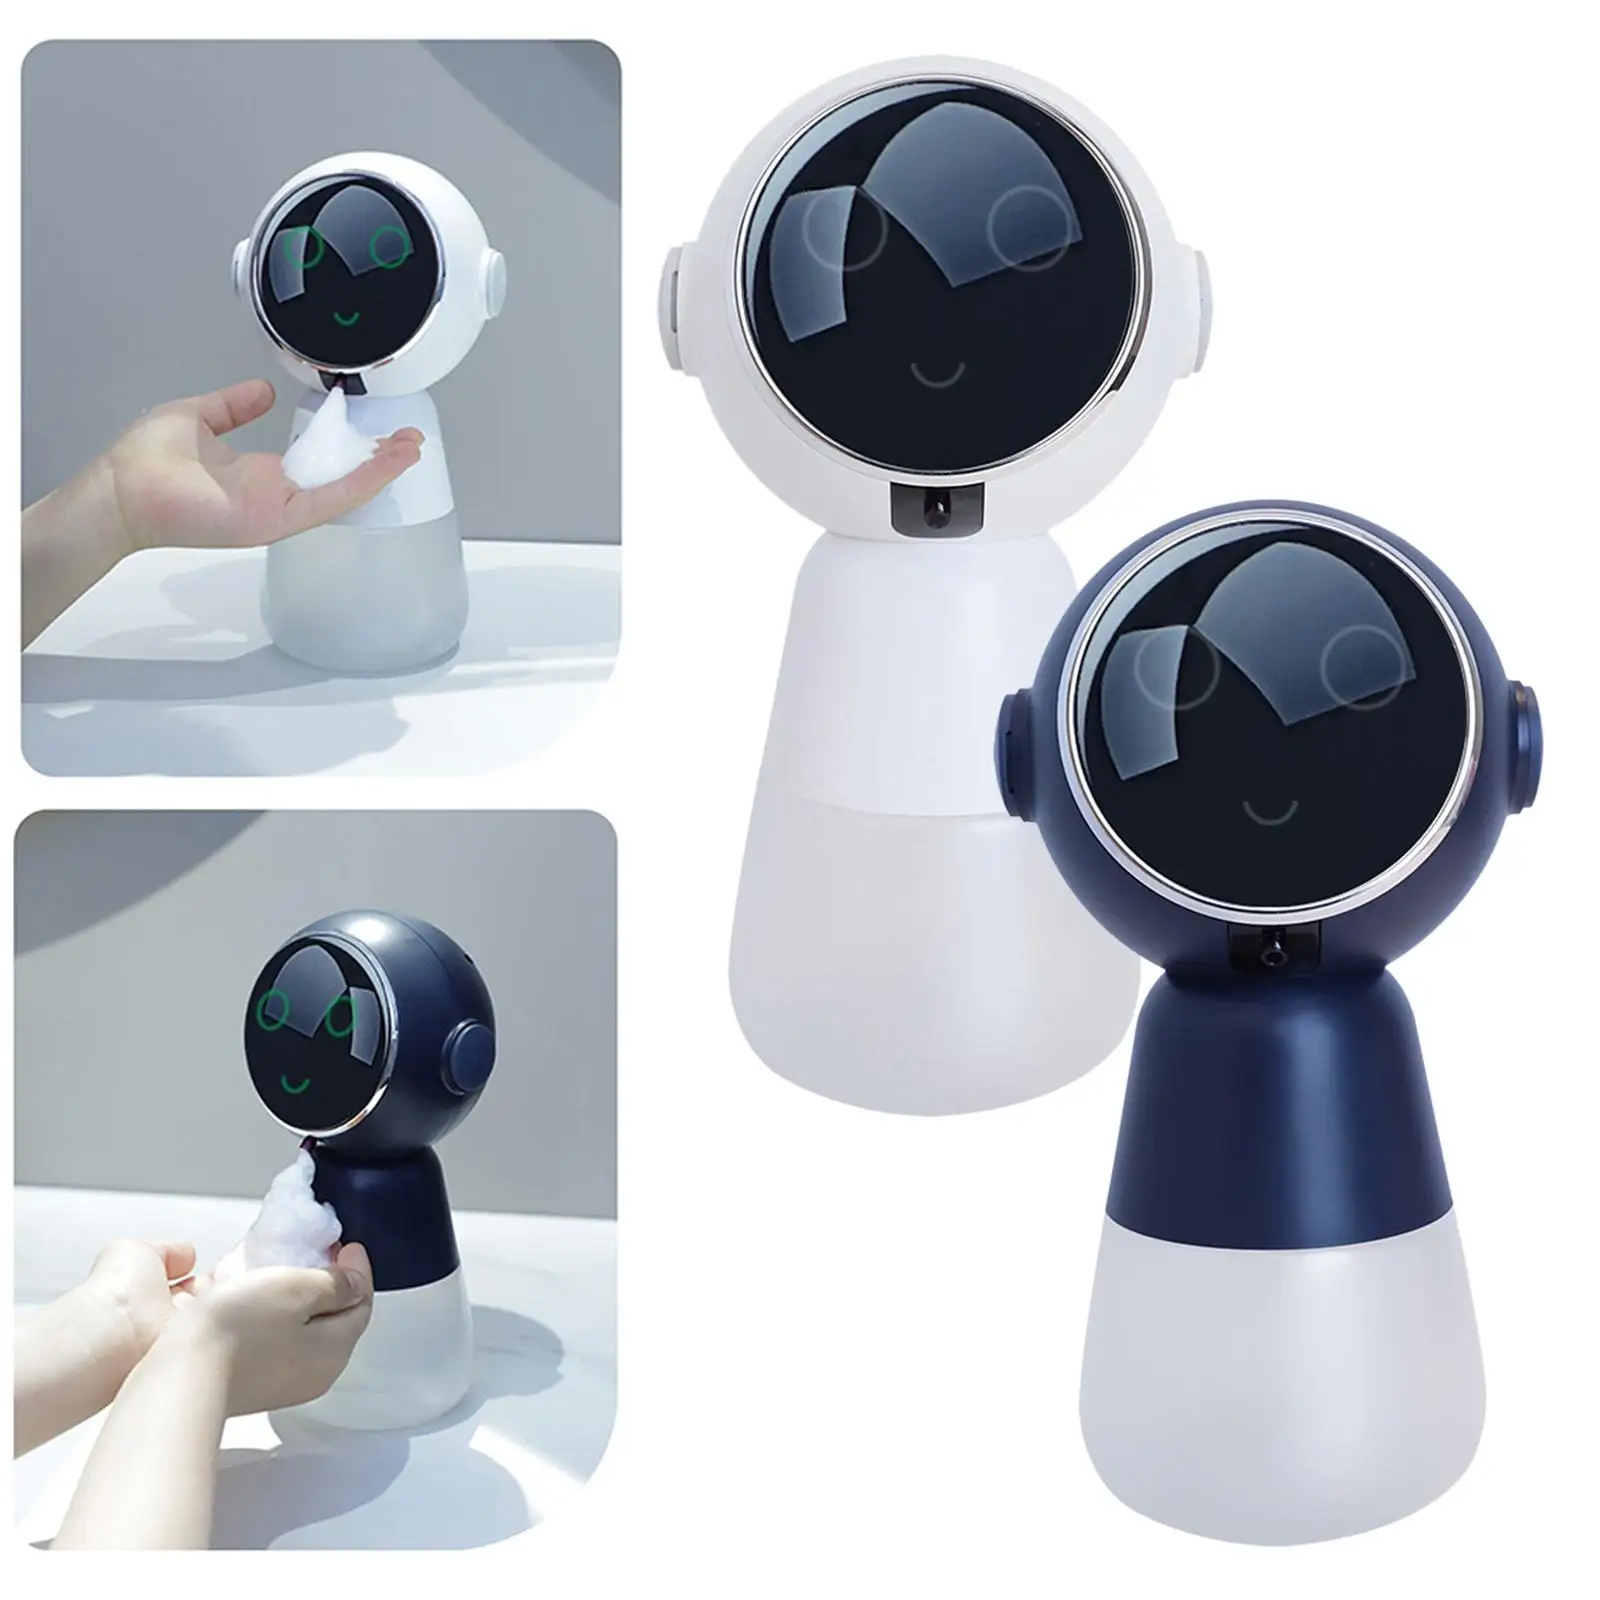 Automatic Soap Dispenser Touch free/Adjustable Soap Dispensing Volume Control Electric Foam Soap Dispenser for Bathroom Office